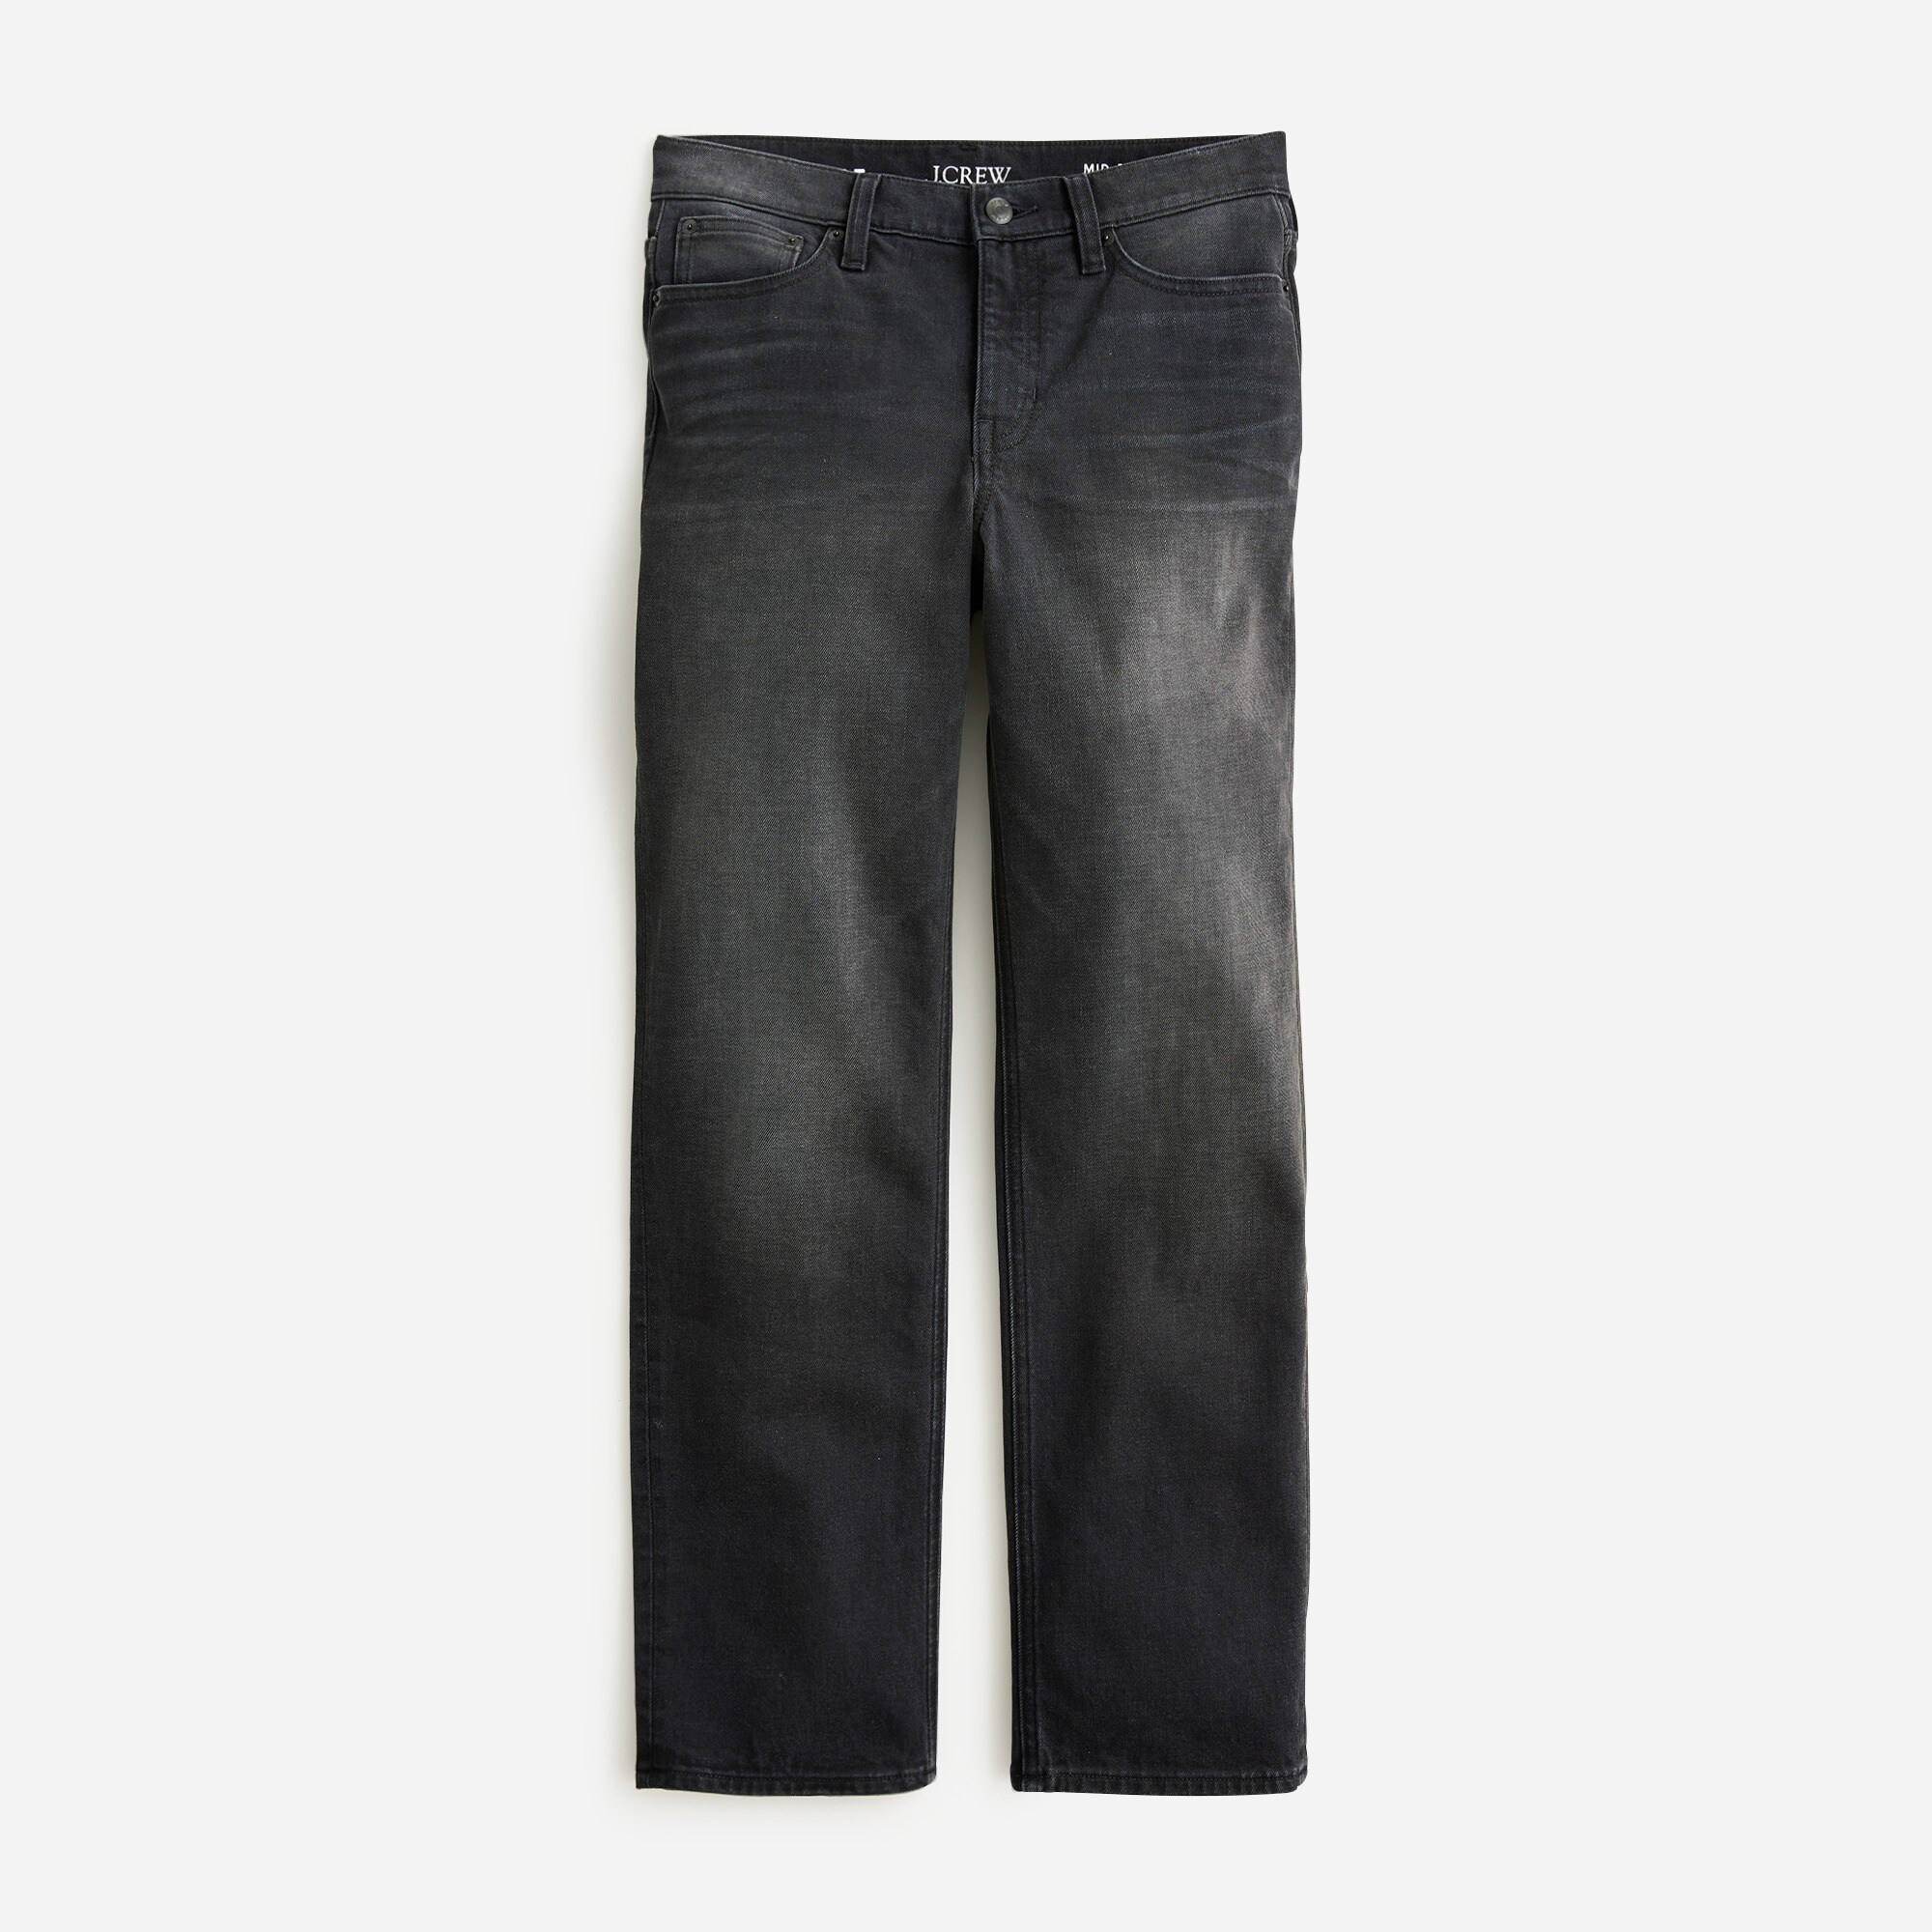  Petite mid-rise '90s classic straight-fit jean in Charcoal wash